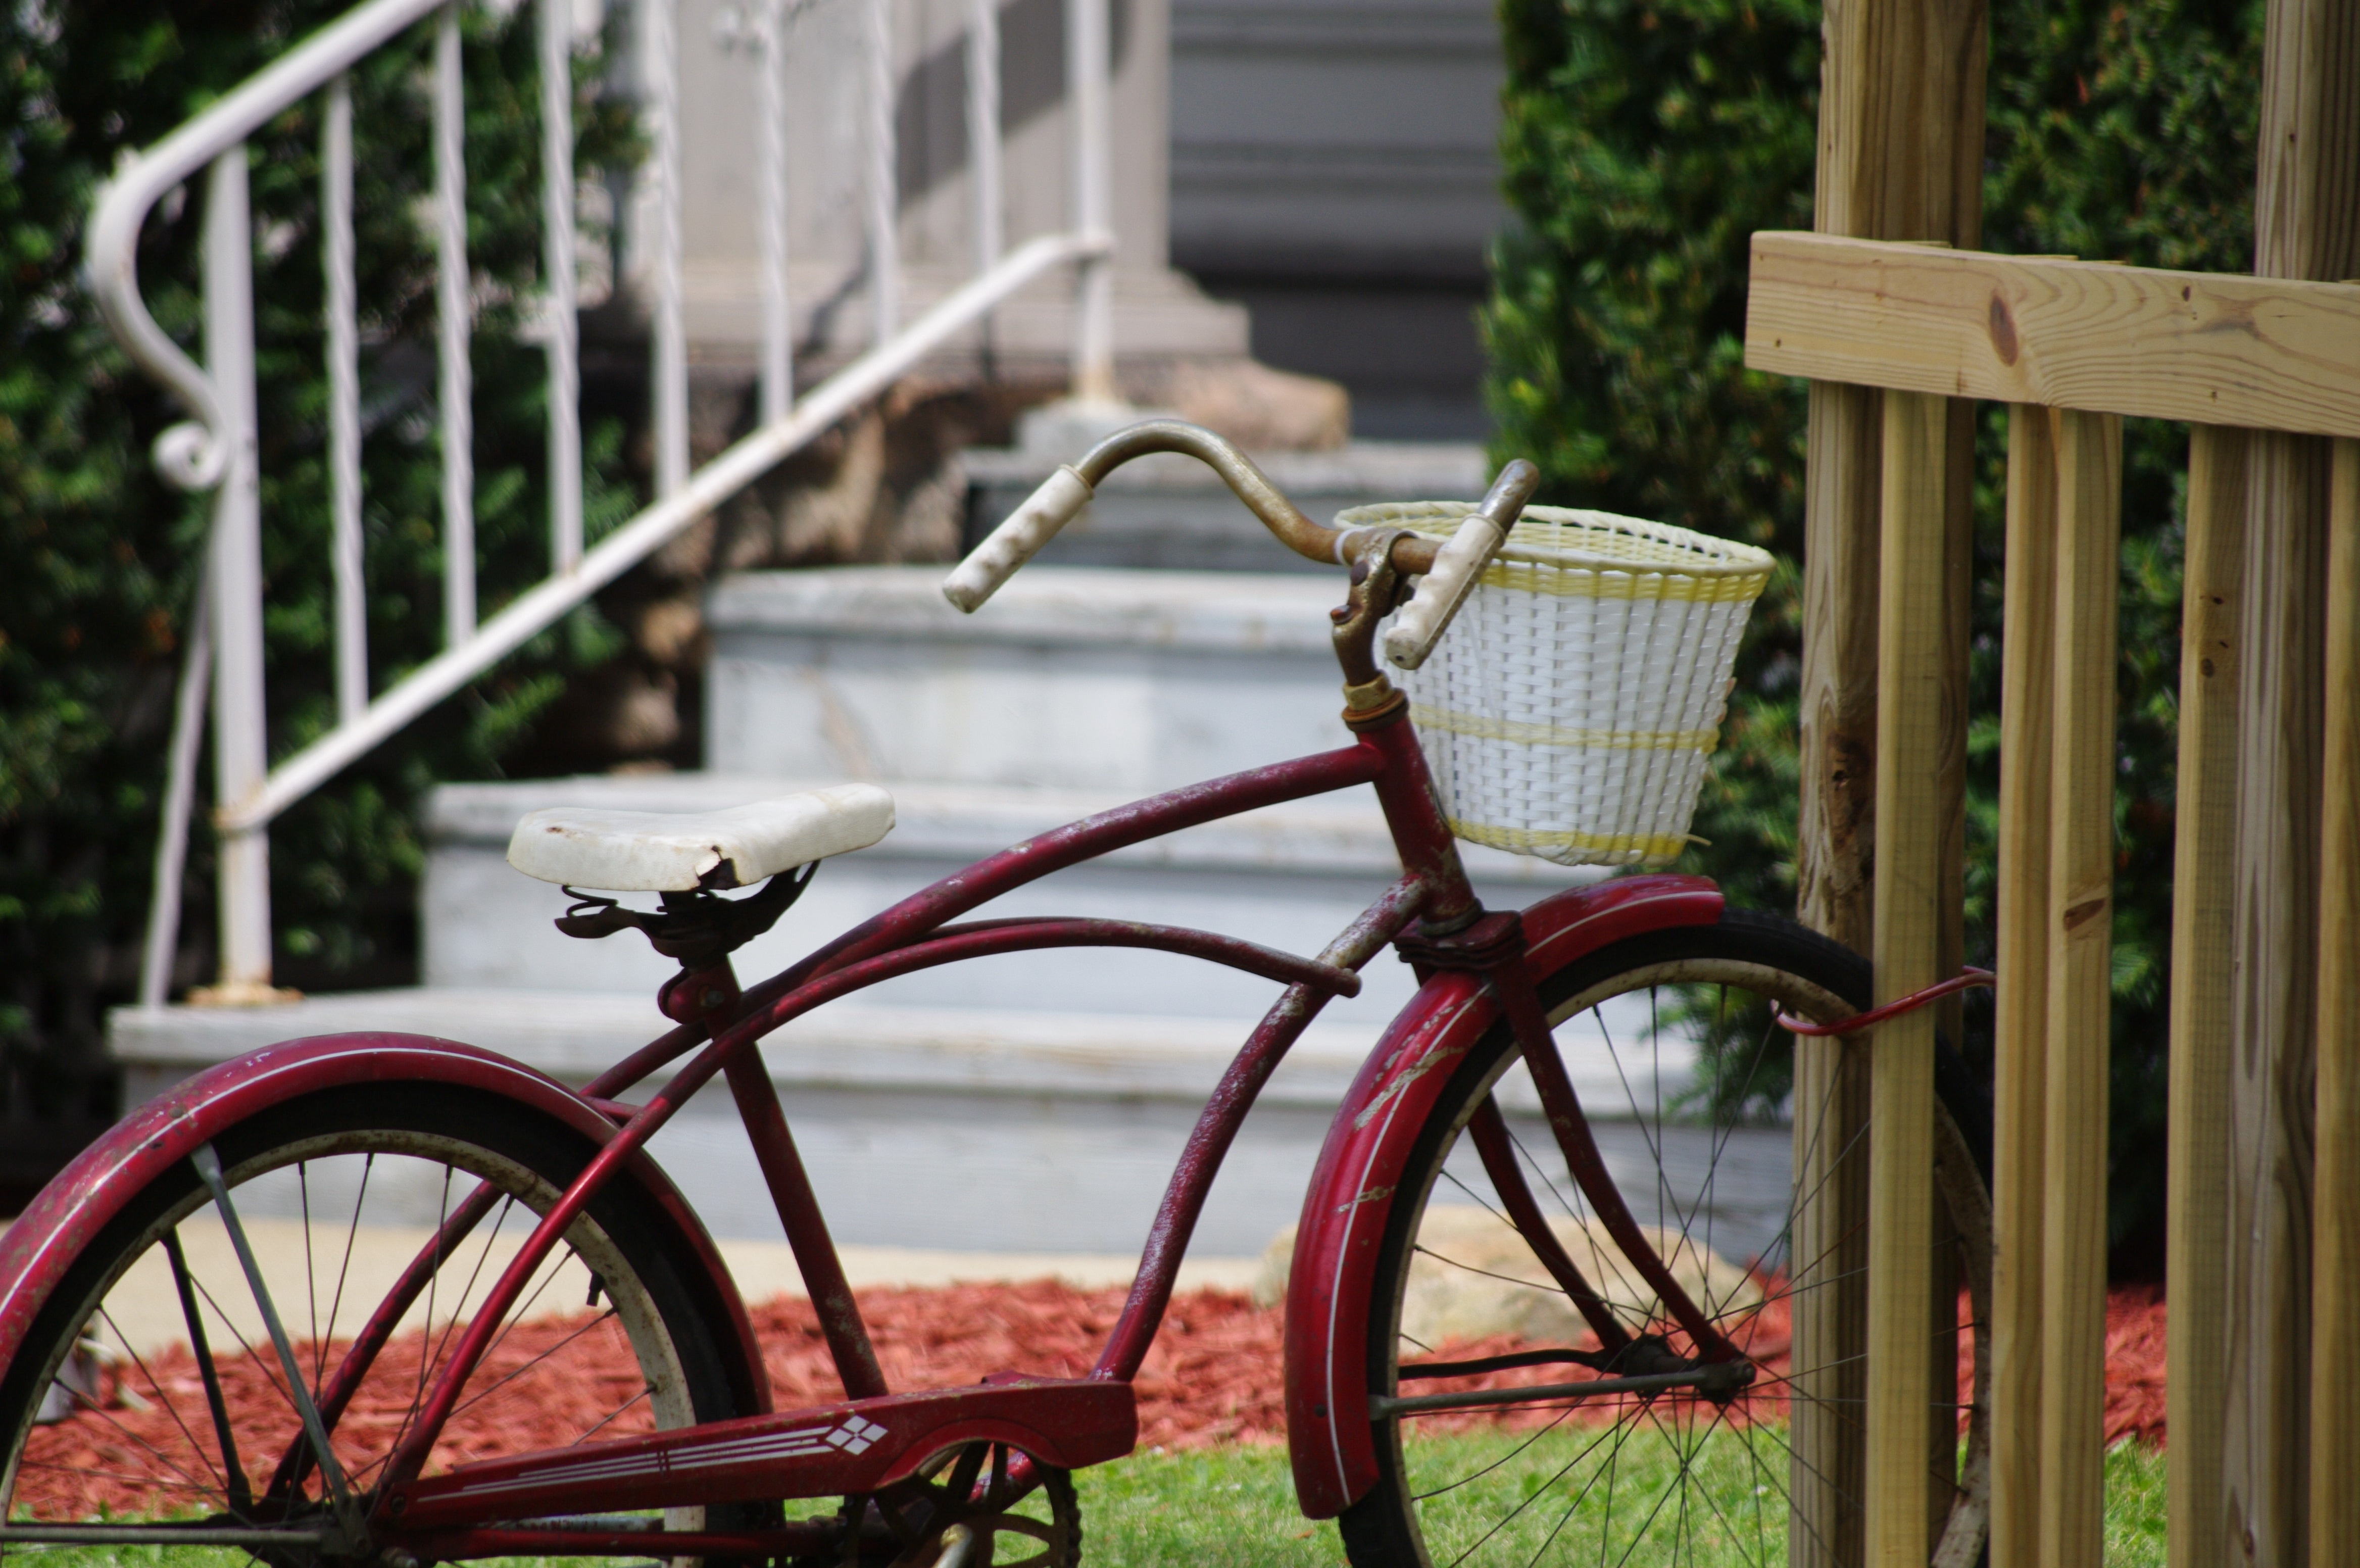 Porch, Bicycle, Bike, Cycle, Activity, bicycle, old-fashioned